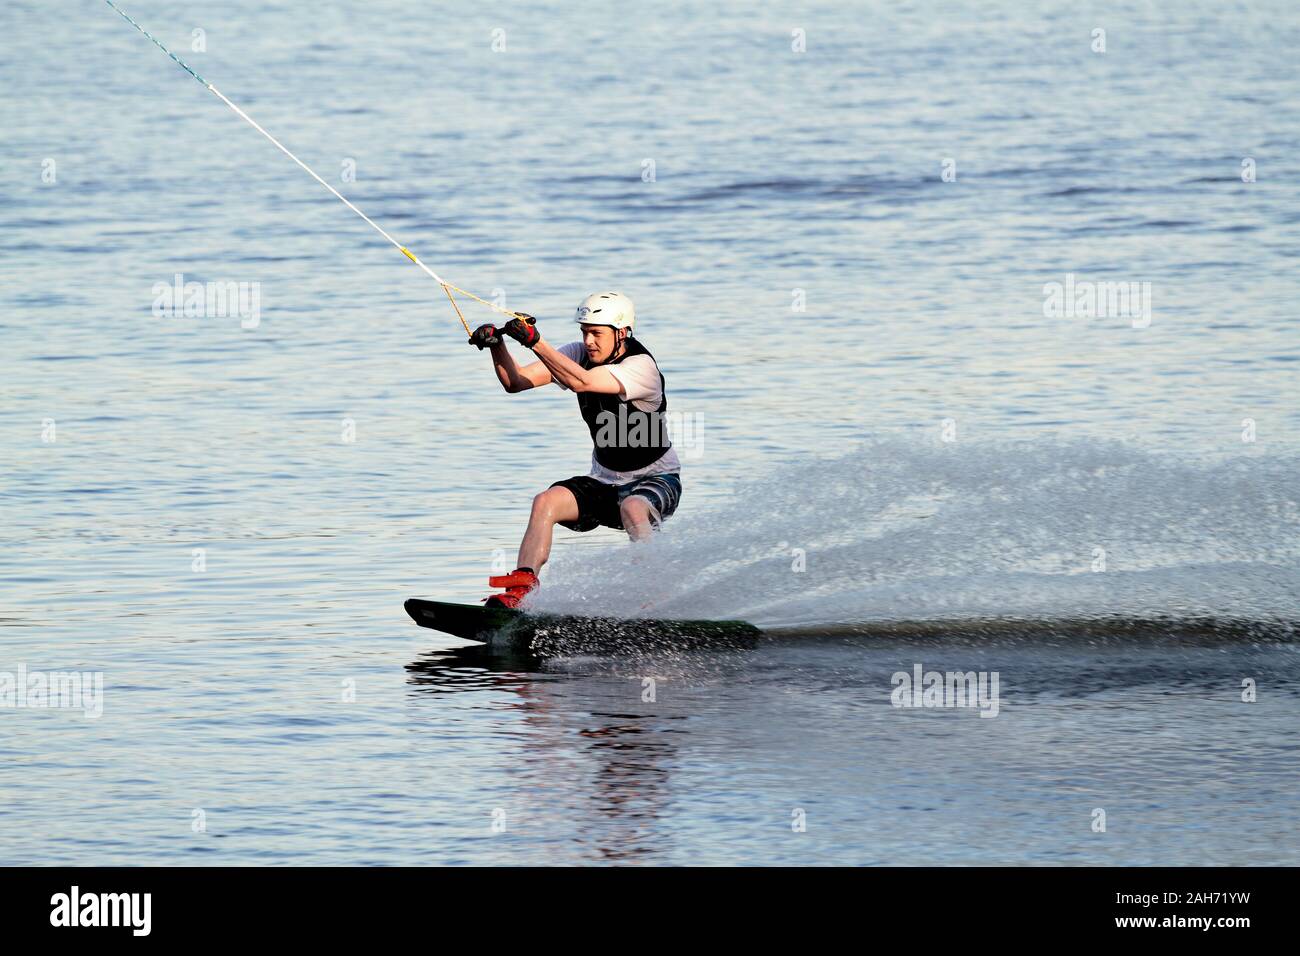 Hämeenlinna Finland 05/31/2016 A young wet man wake boarding on a lake in summertime Stock Photo